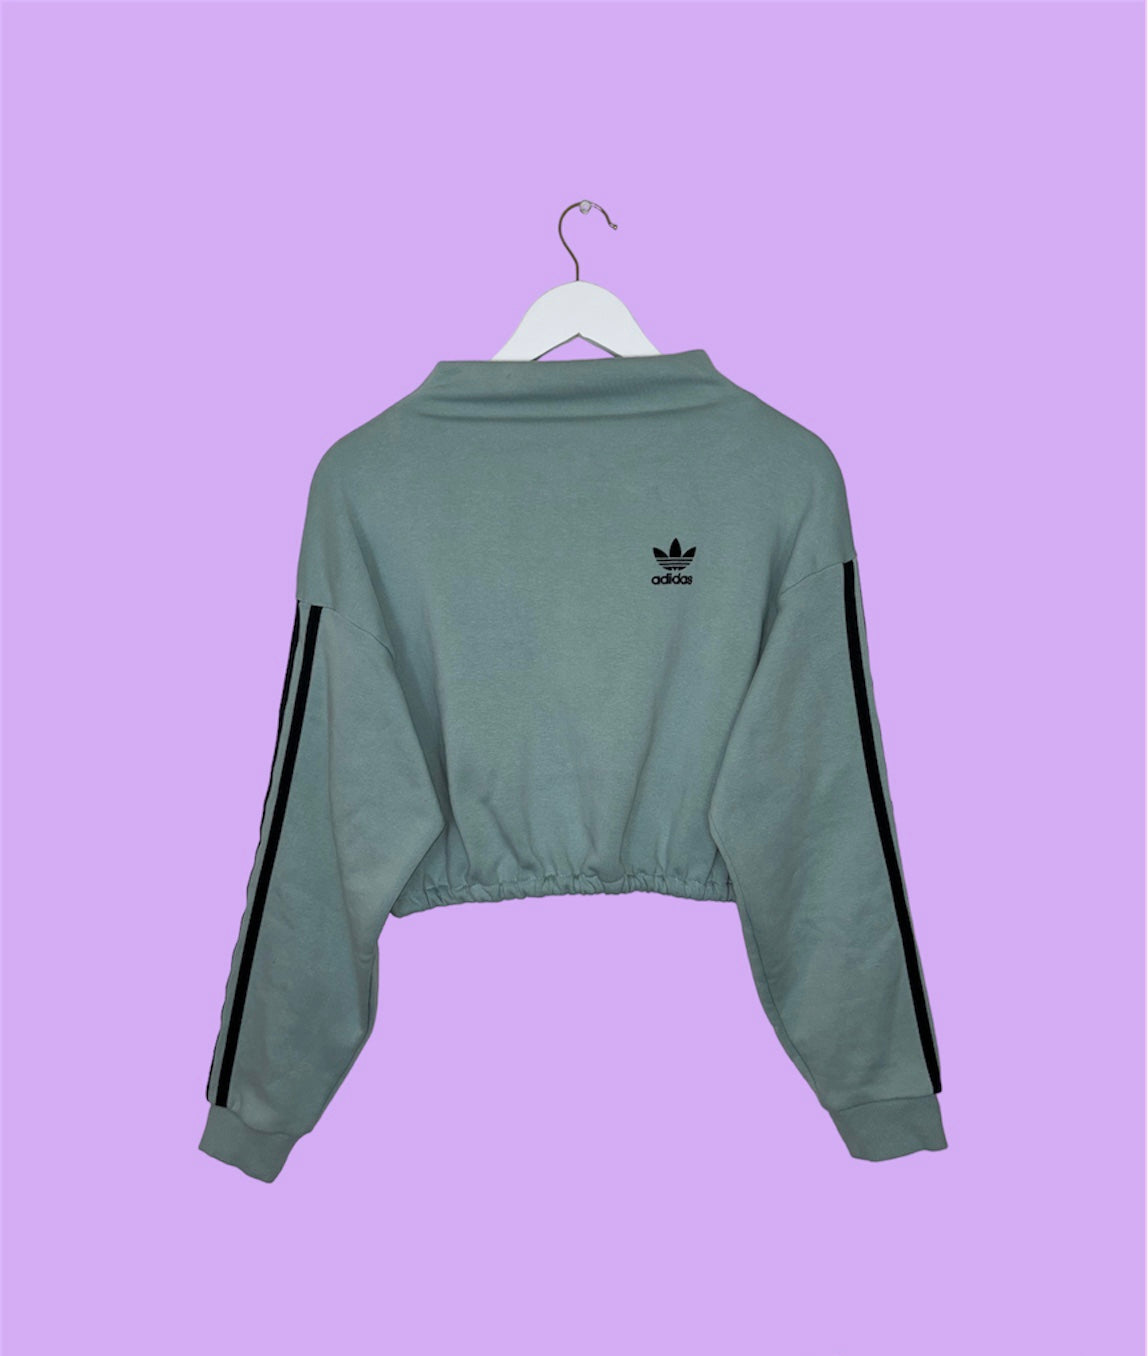 light blue cropped sweatshirt with black adidas logo shown on a lilac background